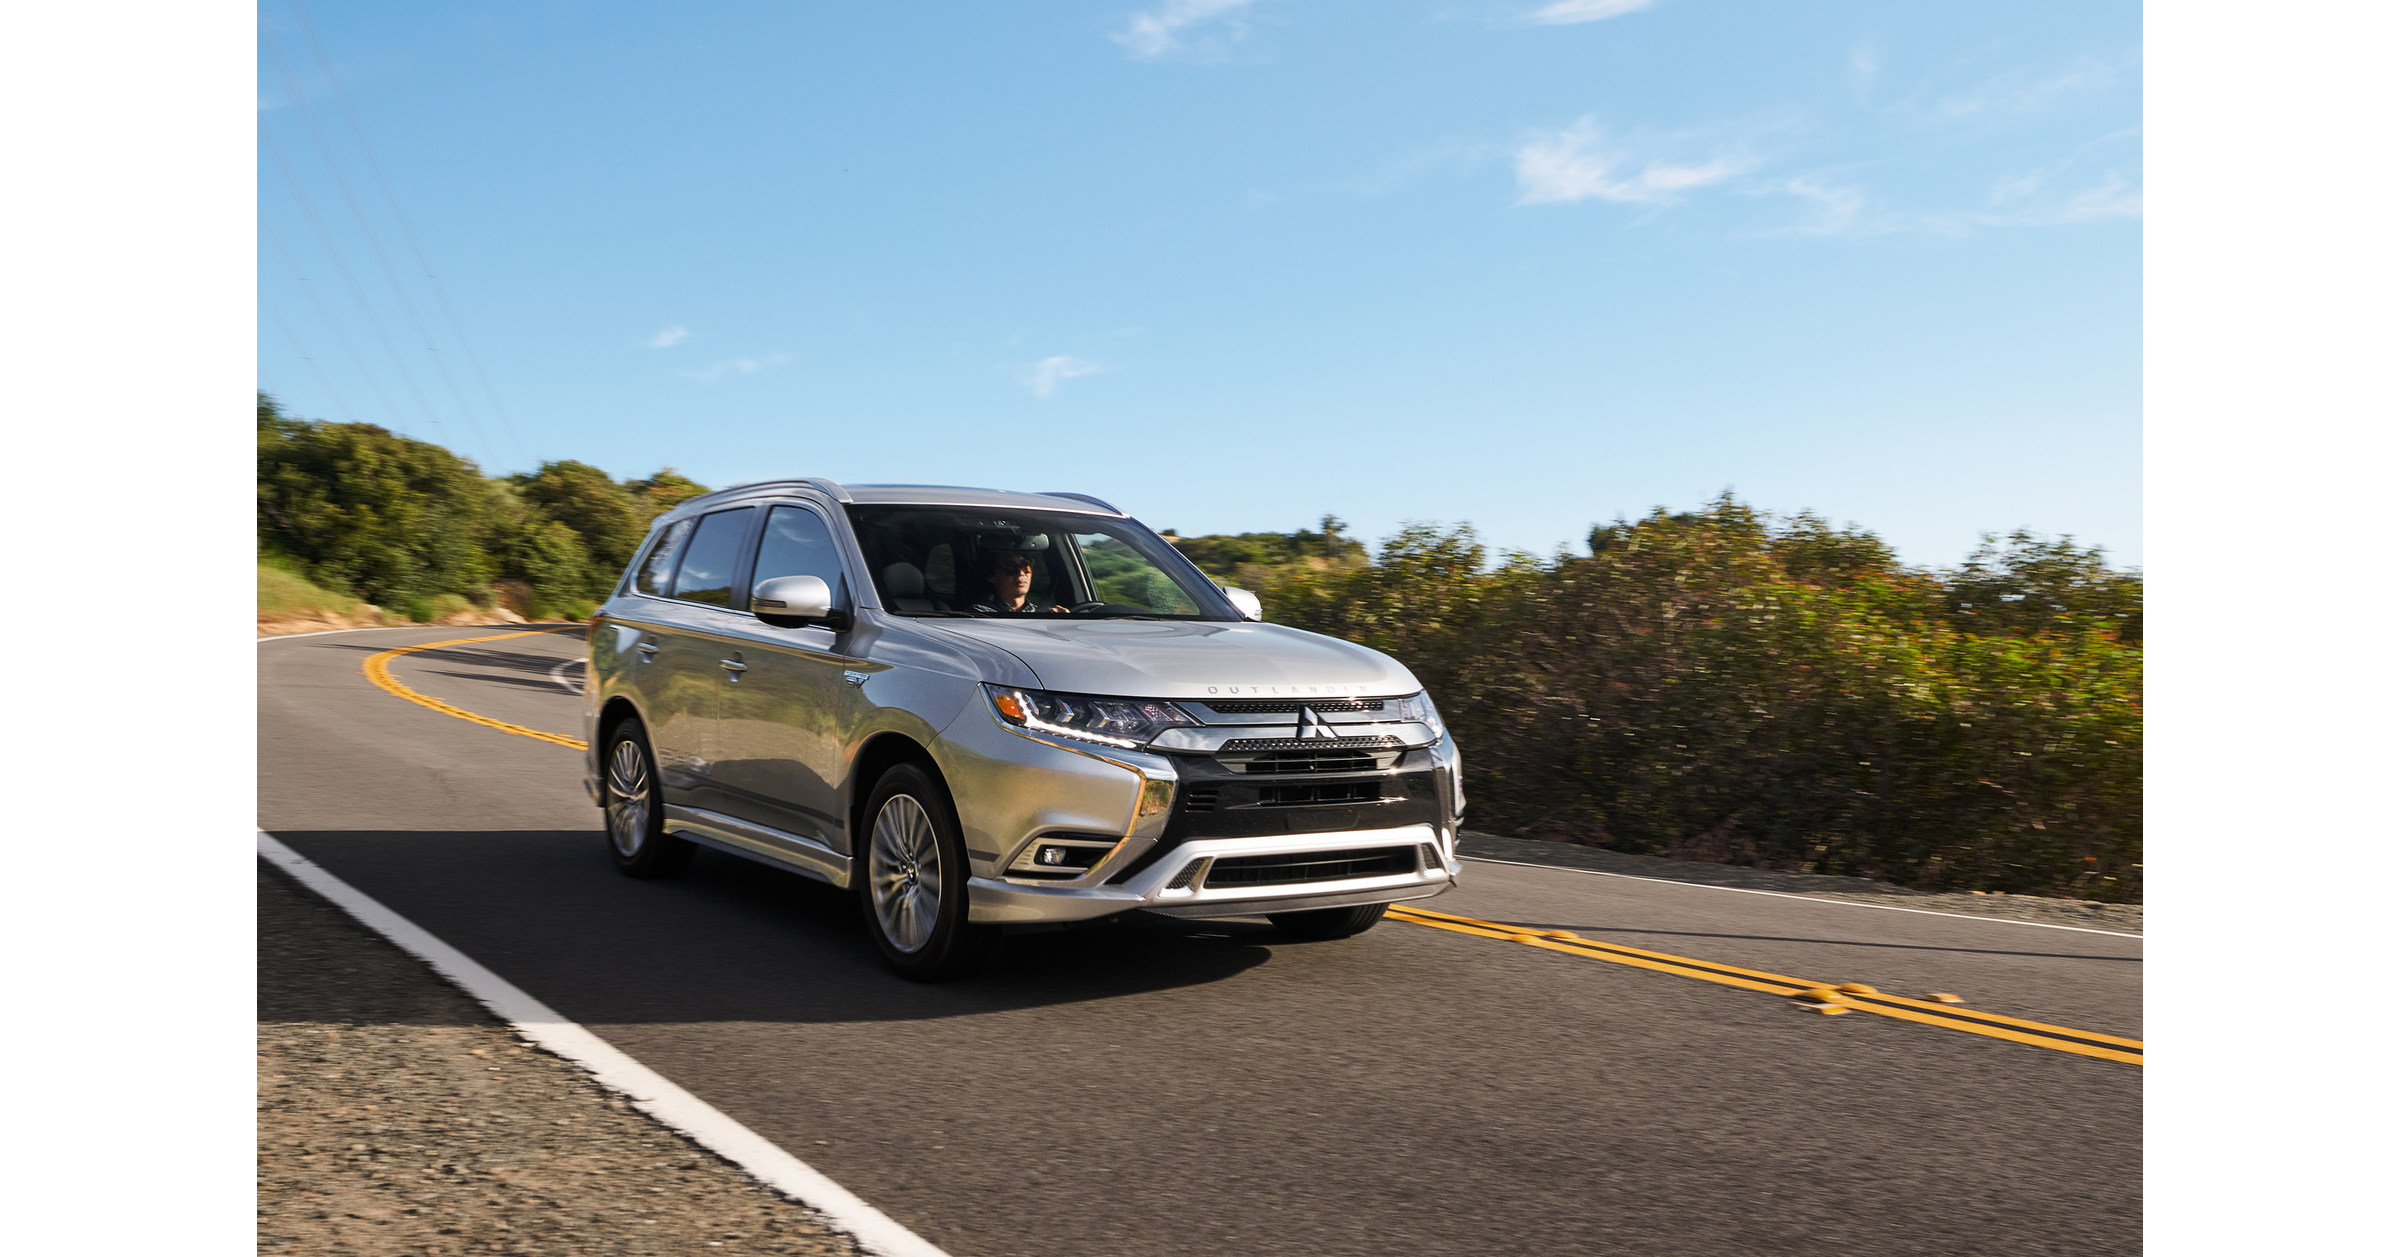 2021 Mitsubishi Outlander: Design, Powertrains And Everything Else We Know